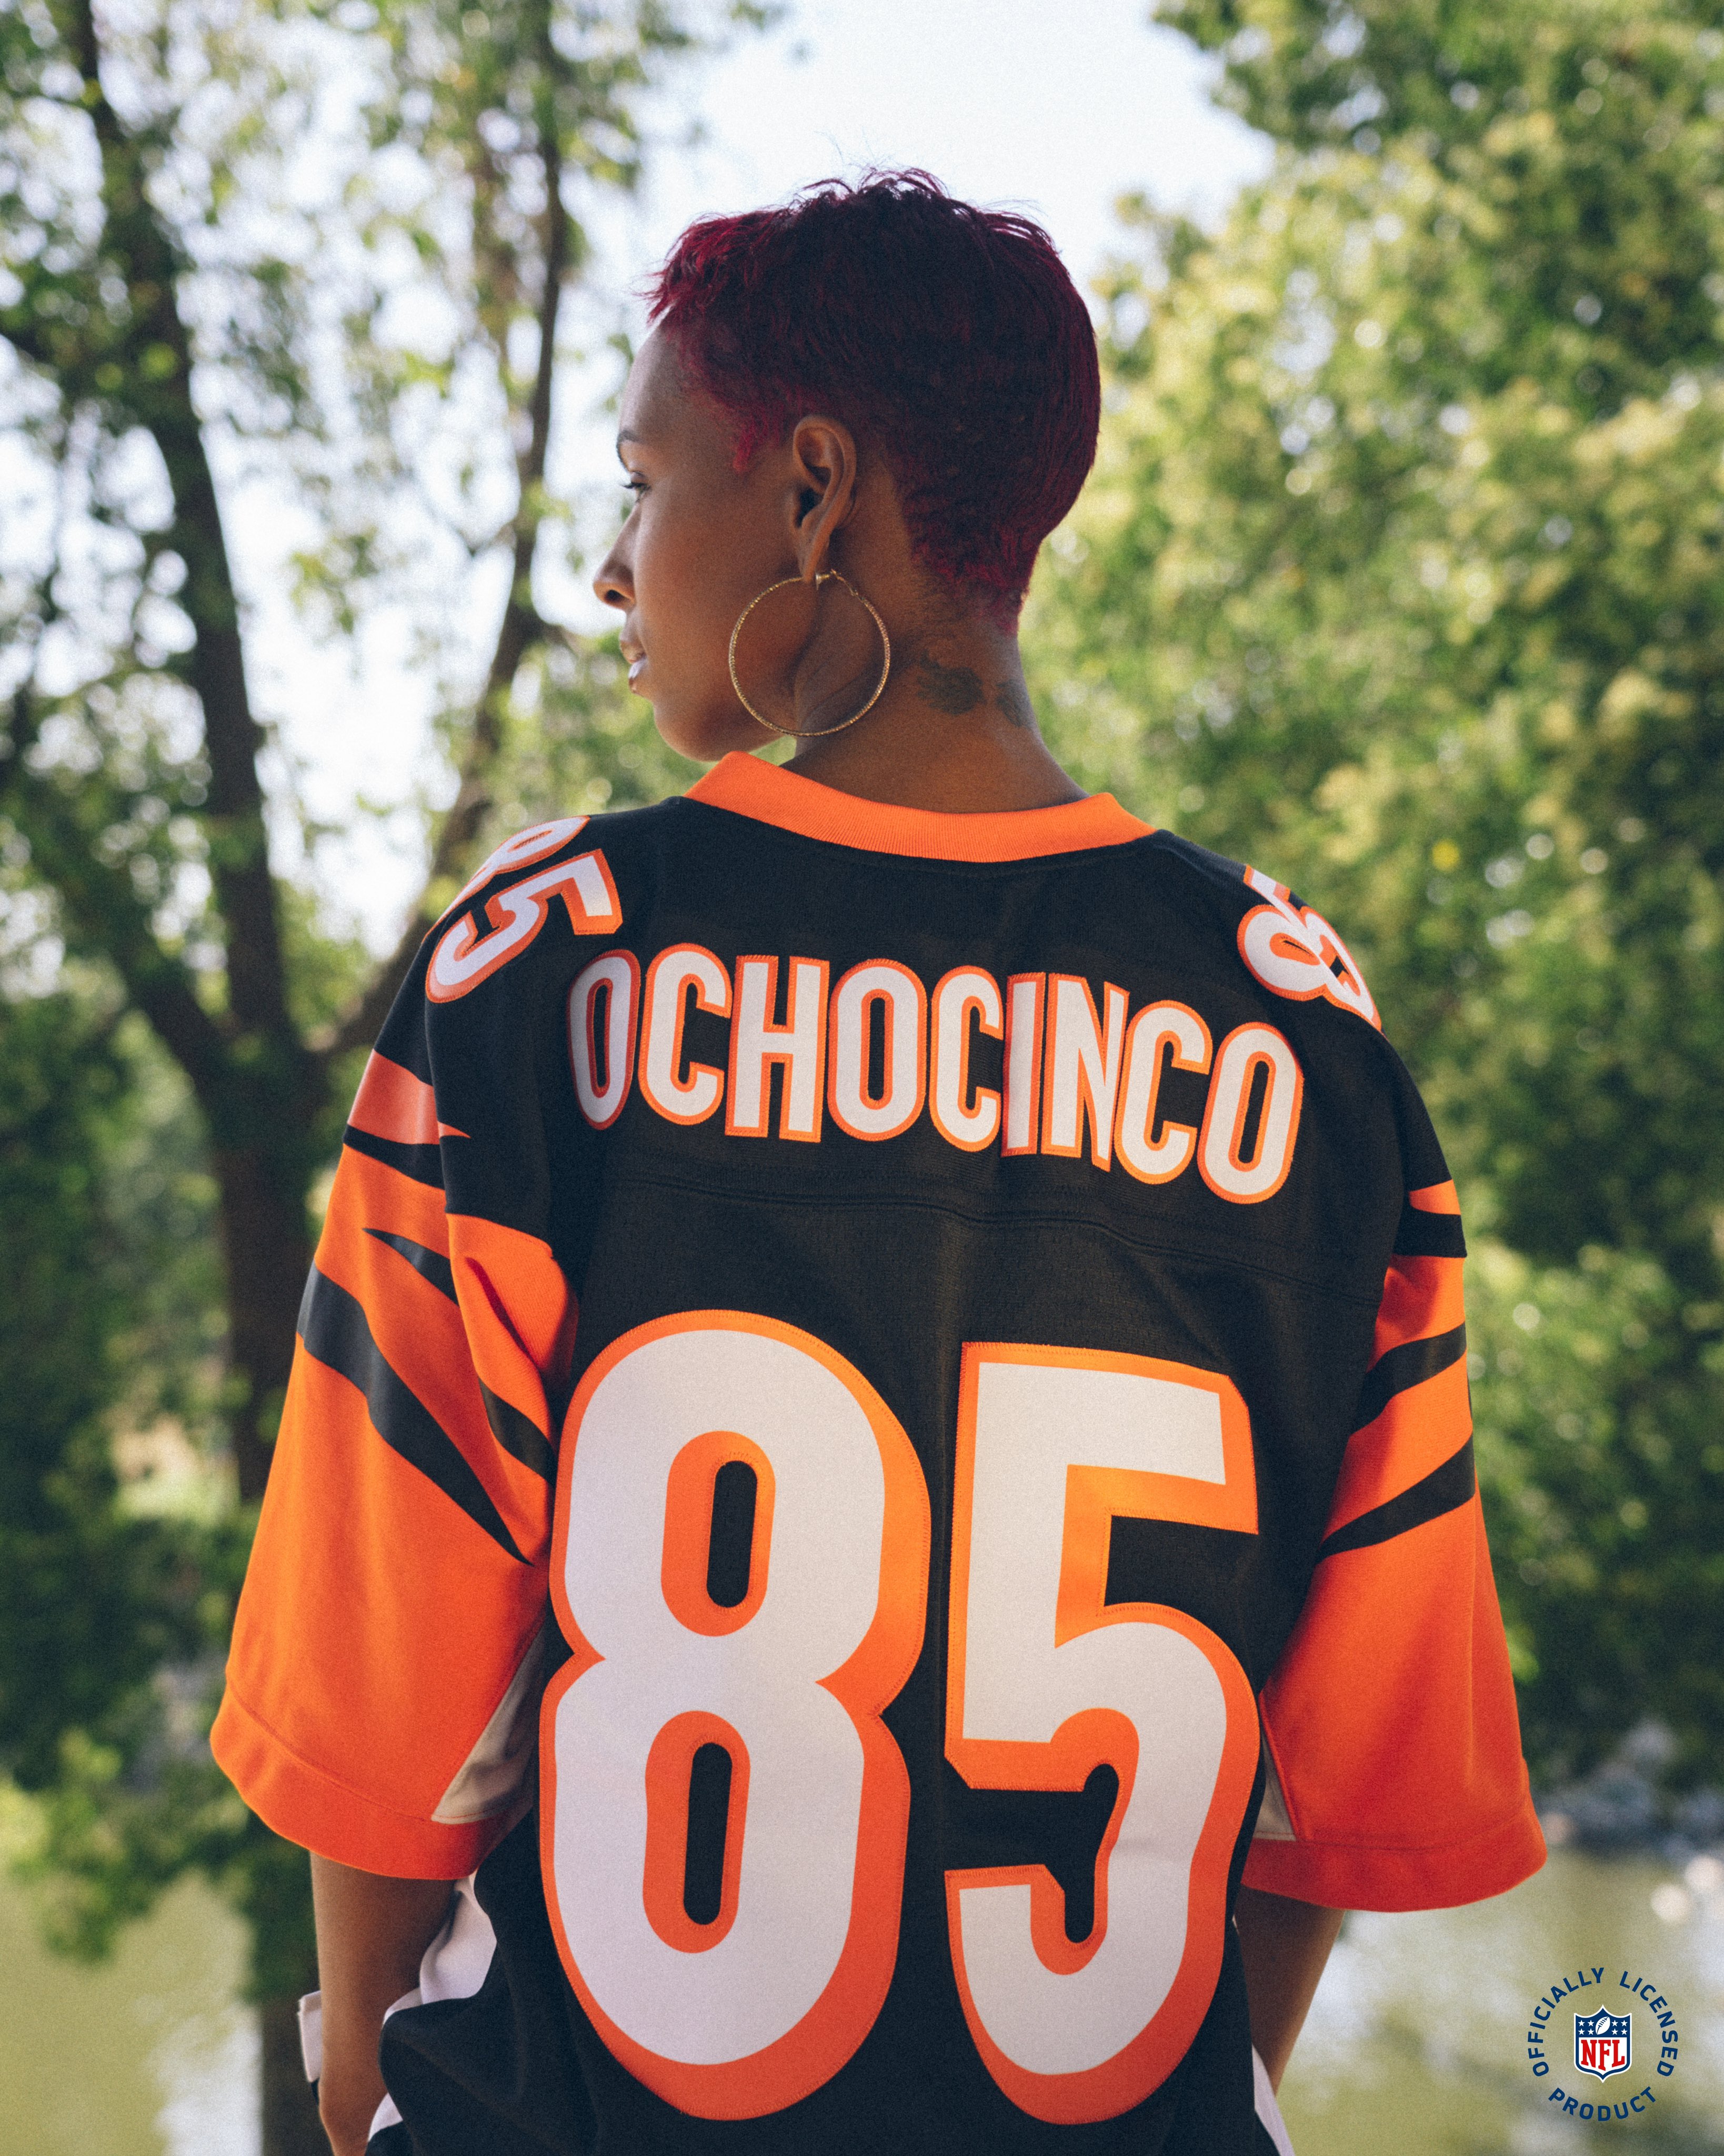 Mitchell & Ness on Twitter: "8 5 🐅 One of the greatest @bengals of  all-time, Chad “Ochocinco” Johnson was also one of the NFL's most  entertaining wide receivers to watch. 2009 Ochocinco